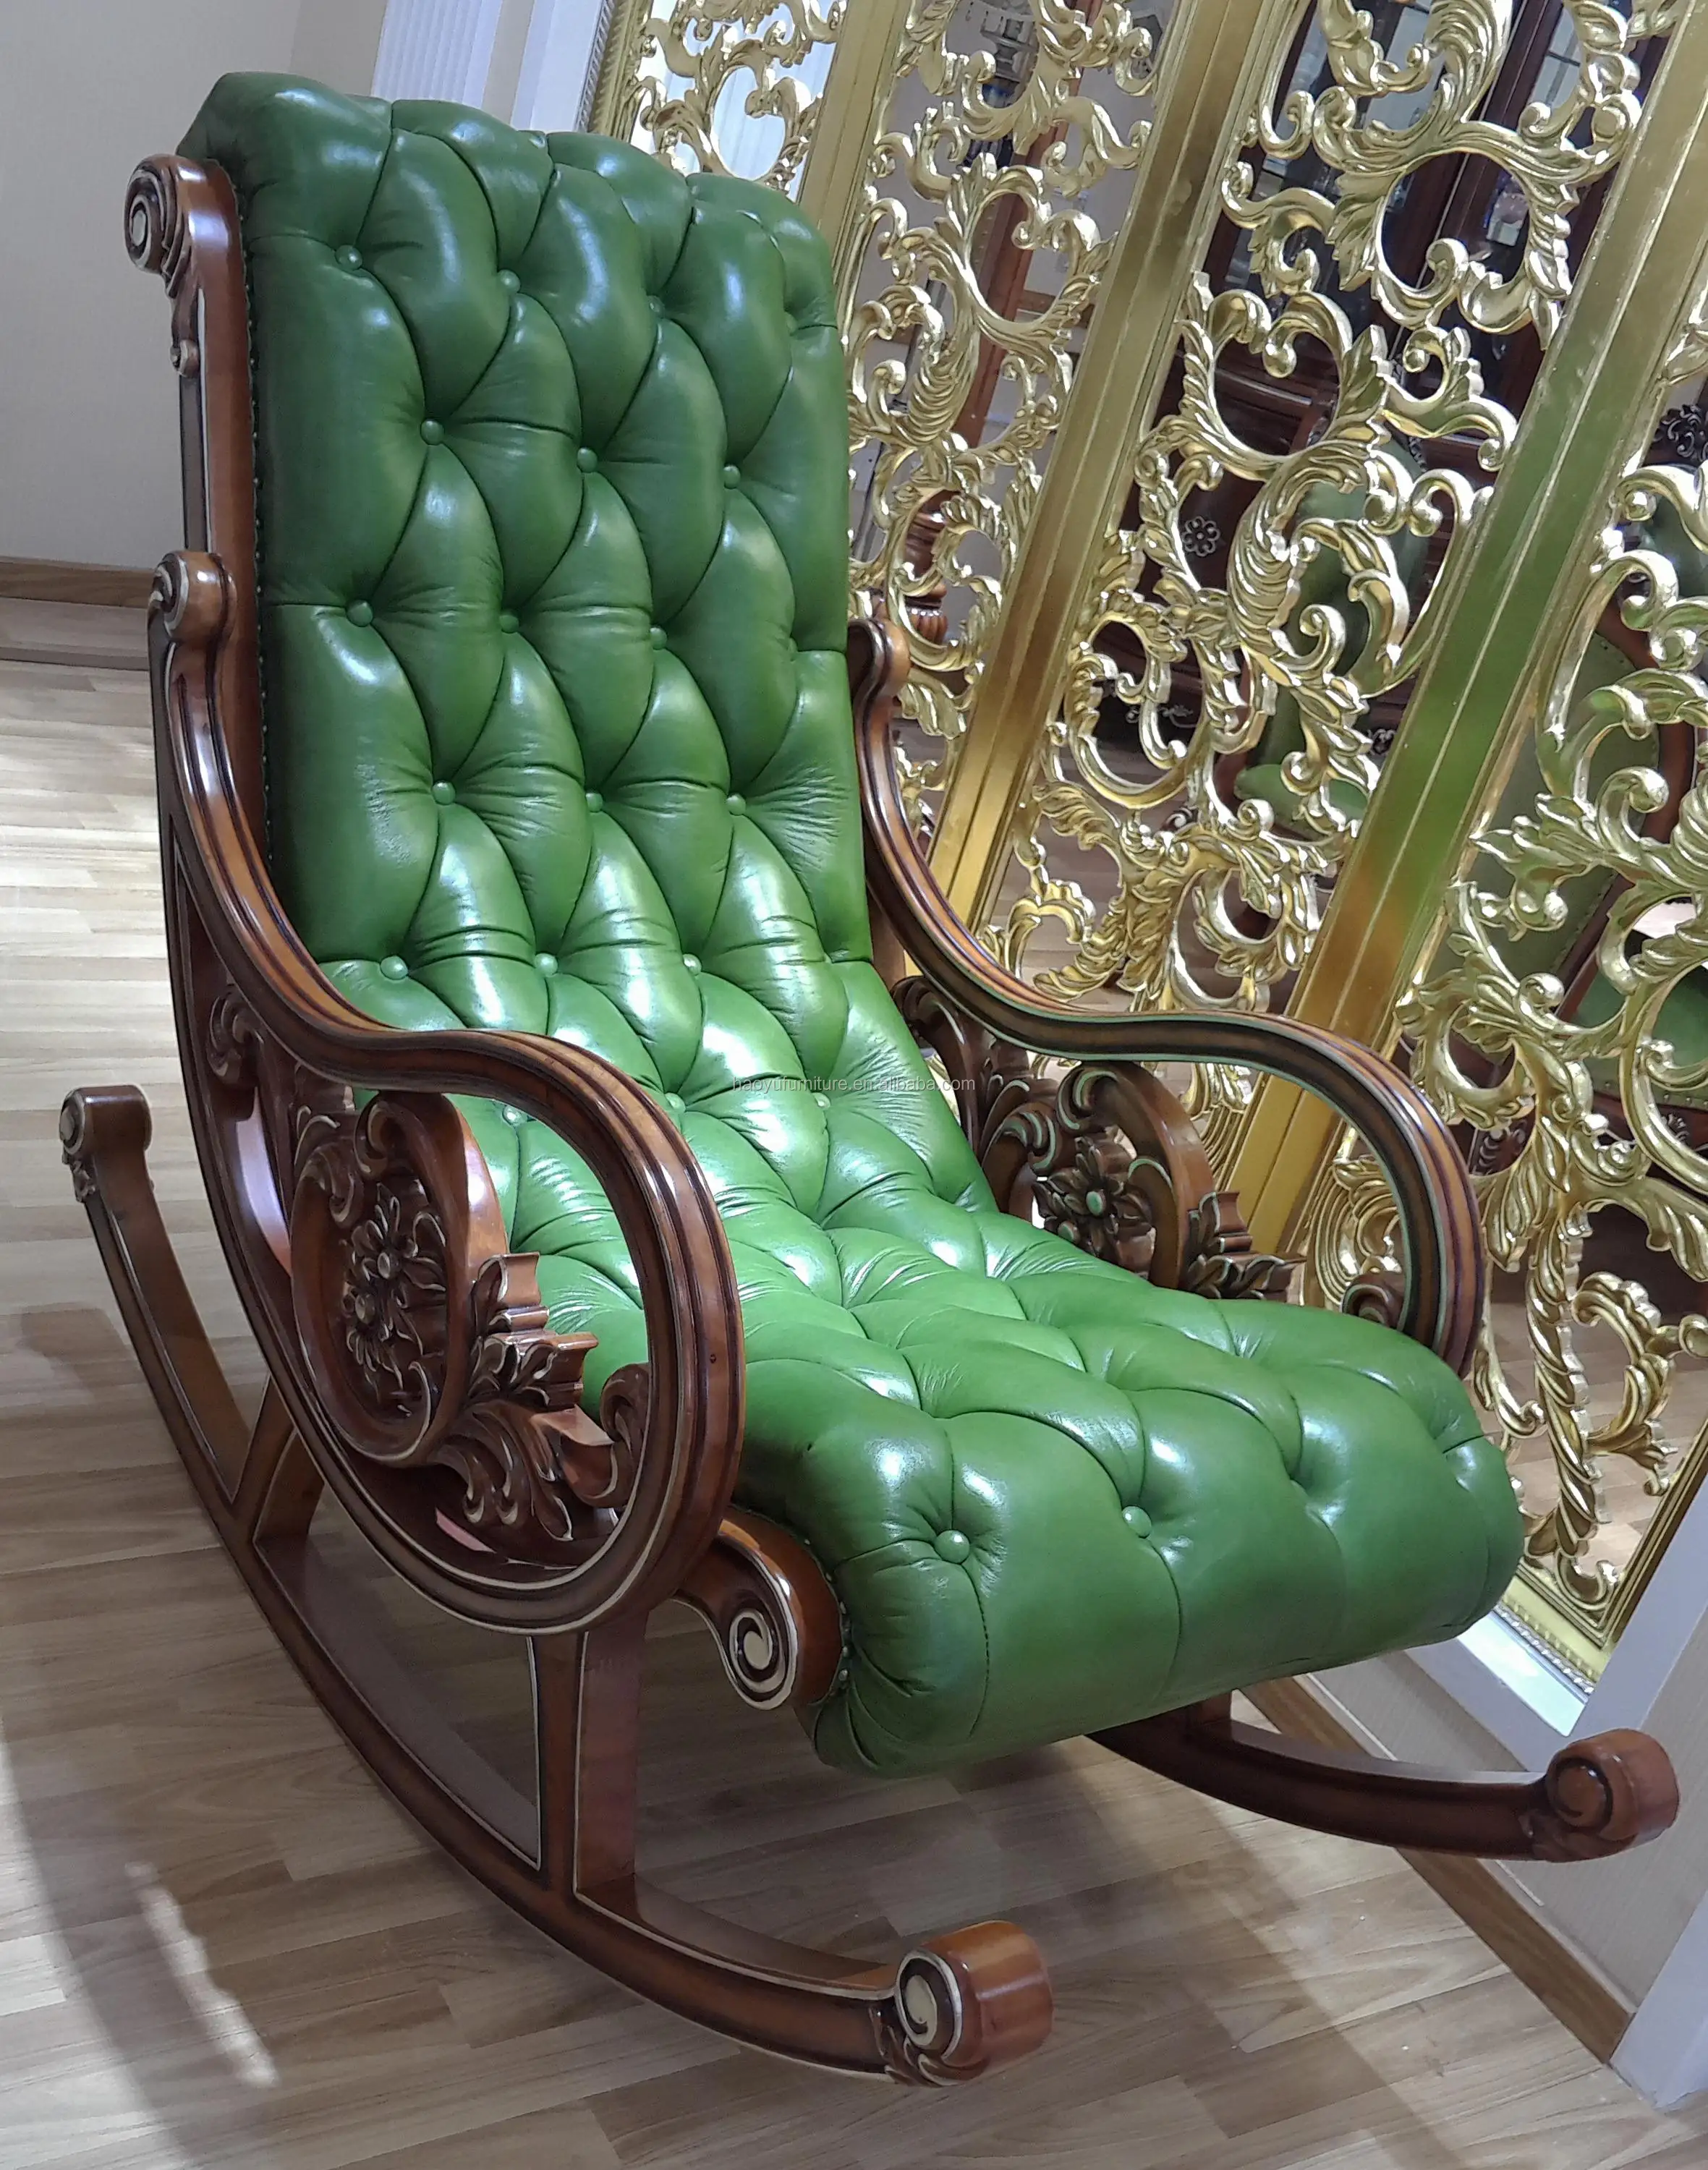 Lc134 Luxury Antique Rocking Chair With Genuine Leather Cover - Buy